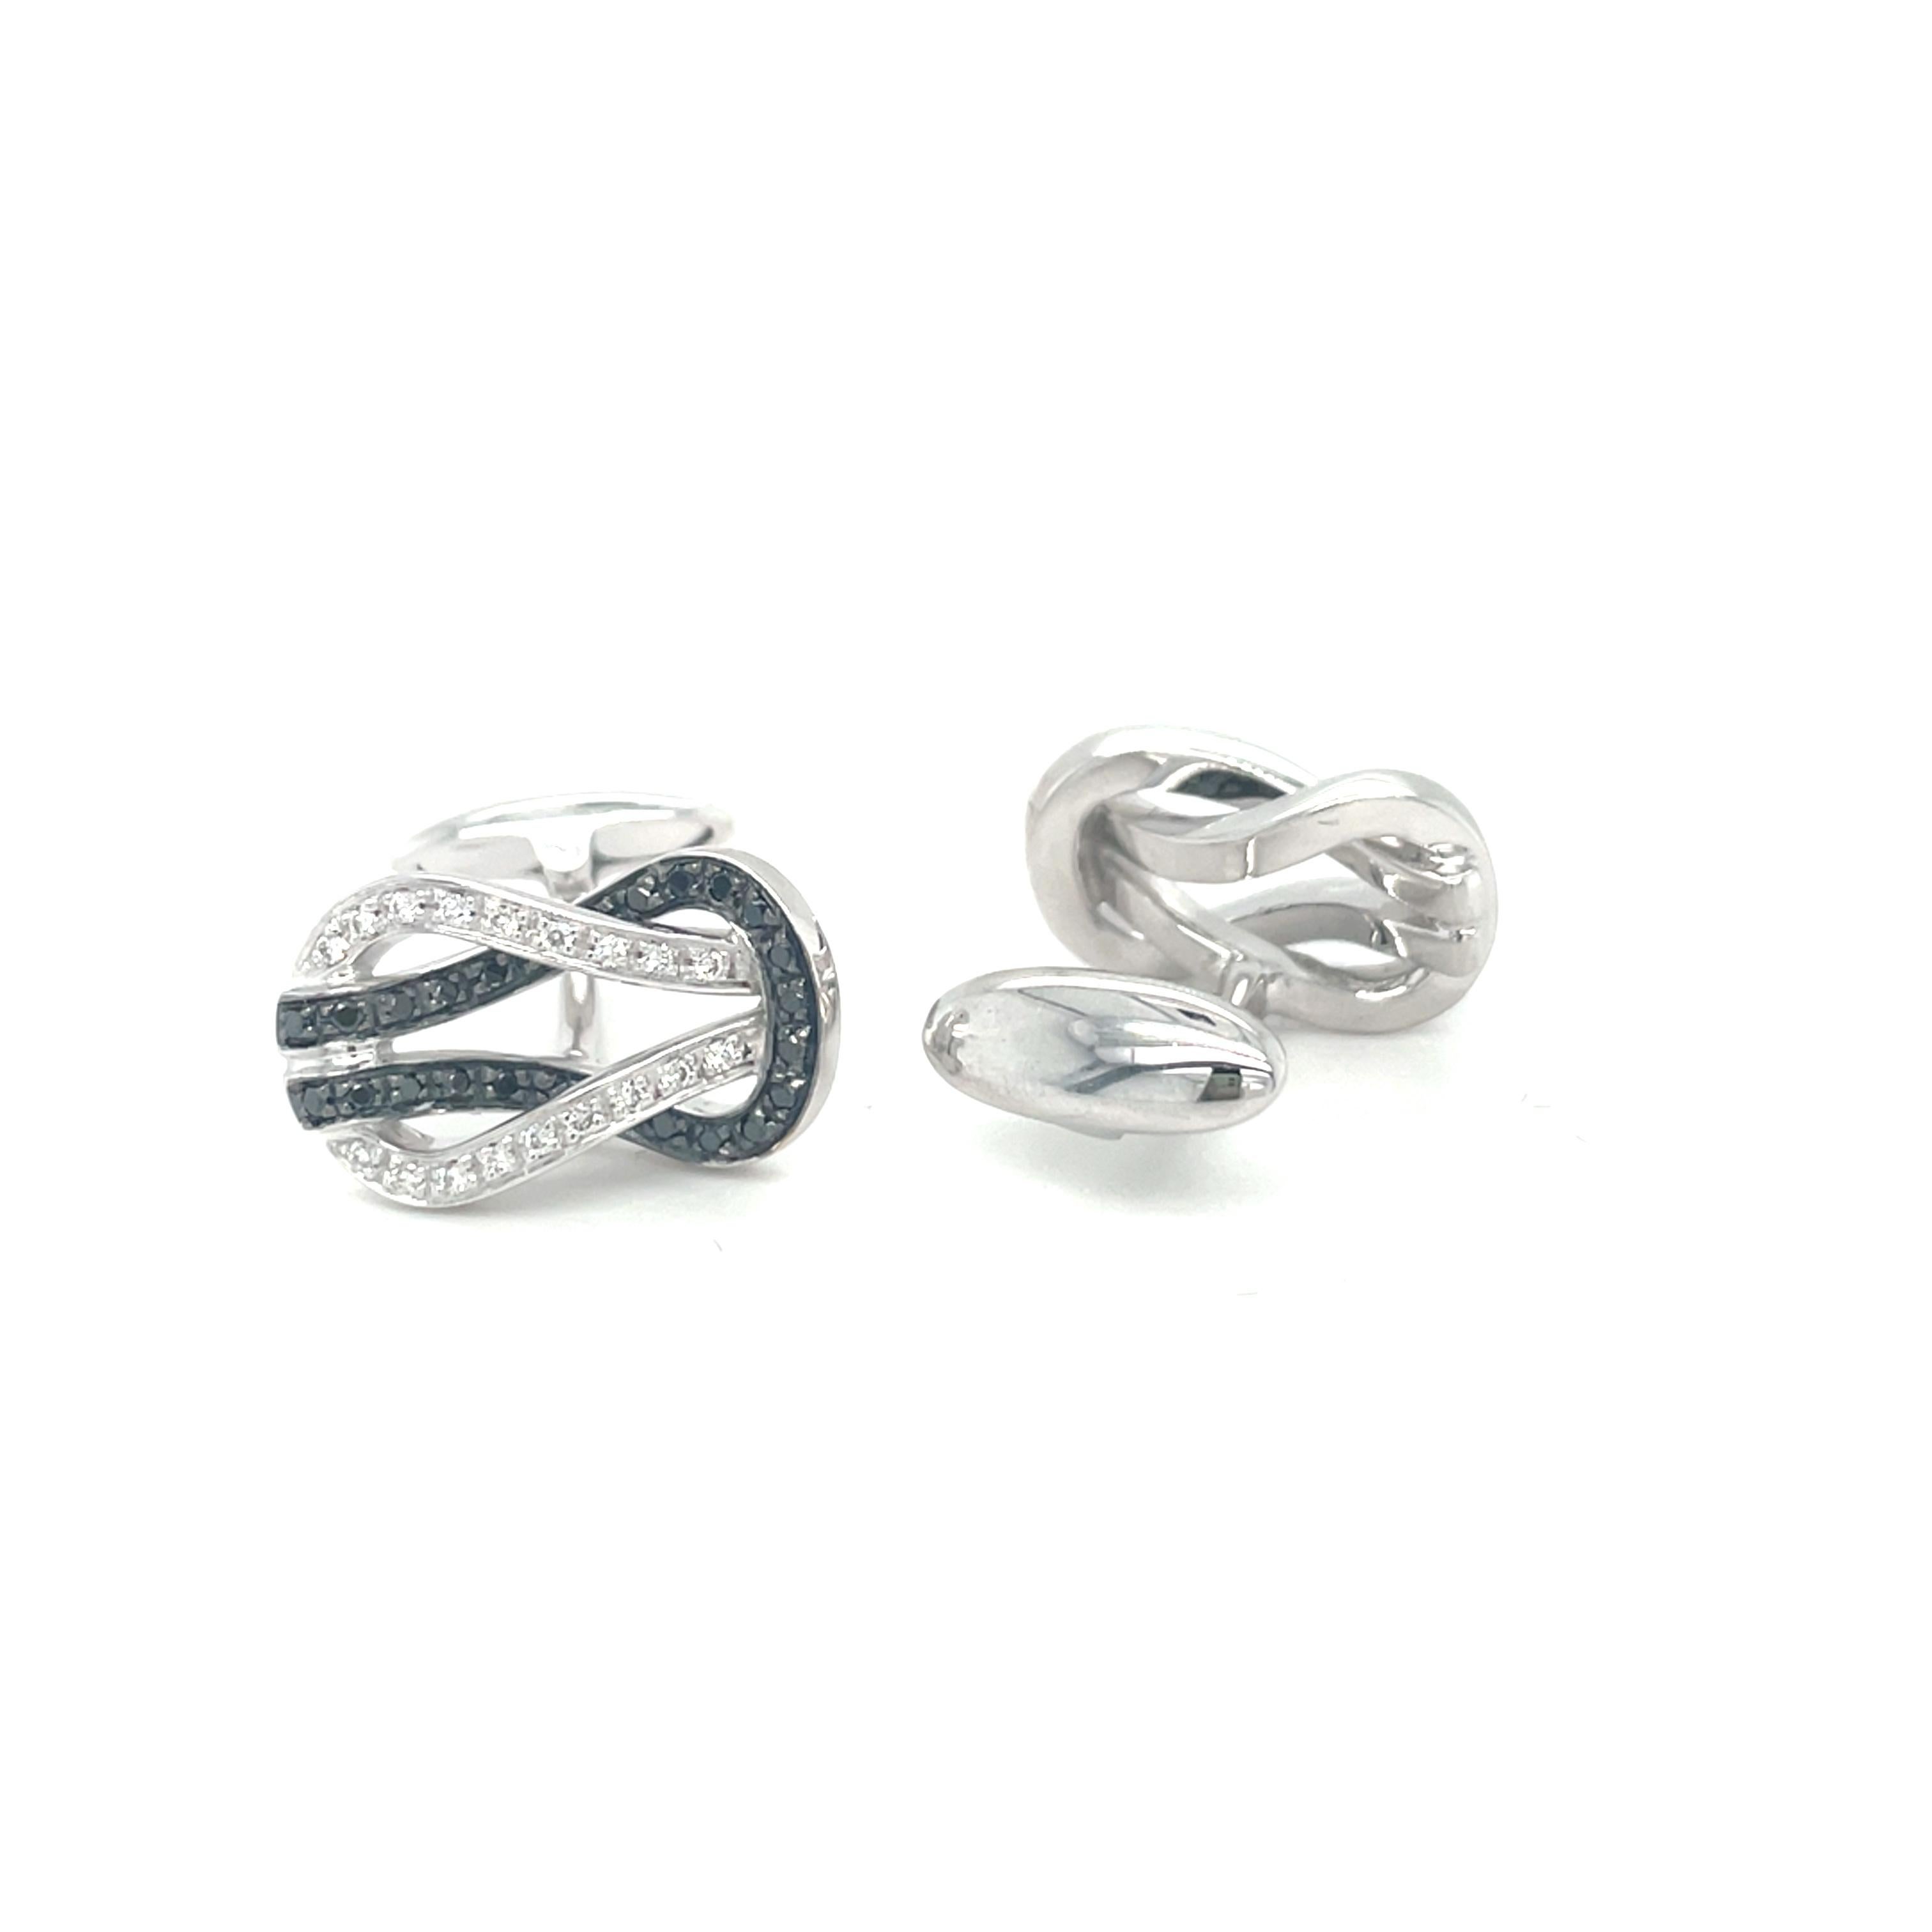 These white gold cufflinks are from Men's Collection. These cufflinks are decorated with White gold, diamond G color VS clarity 0.28 ct and black diamonds 0.42ct. The dimensions of the cufflinks are 2cm x 1.2cm. These cufflinks are a perfect upgrade